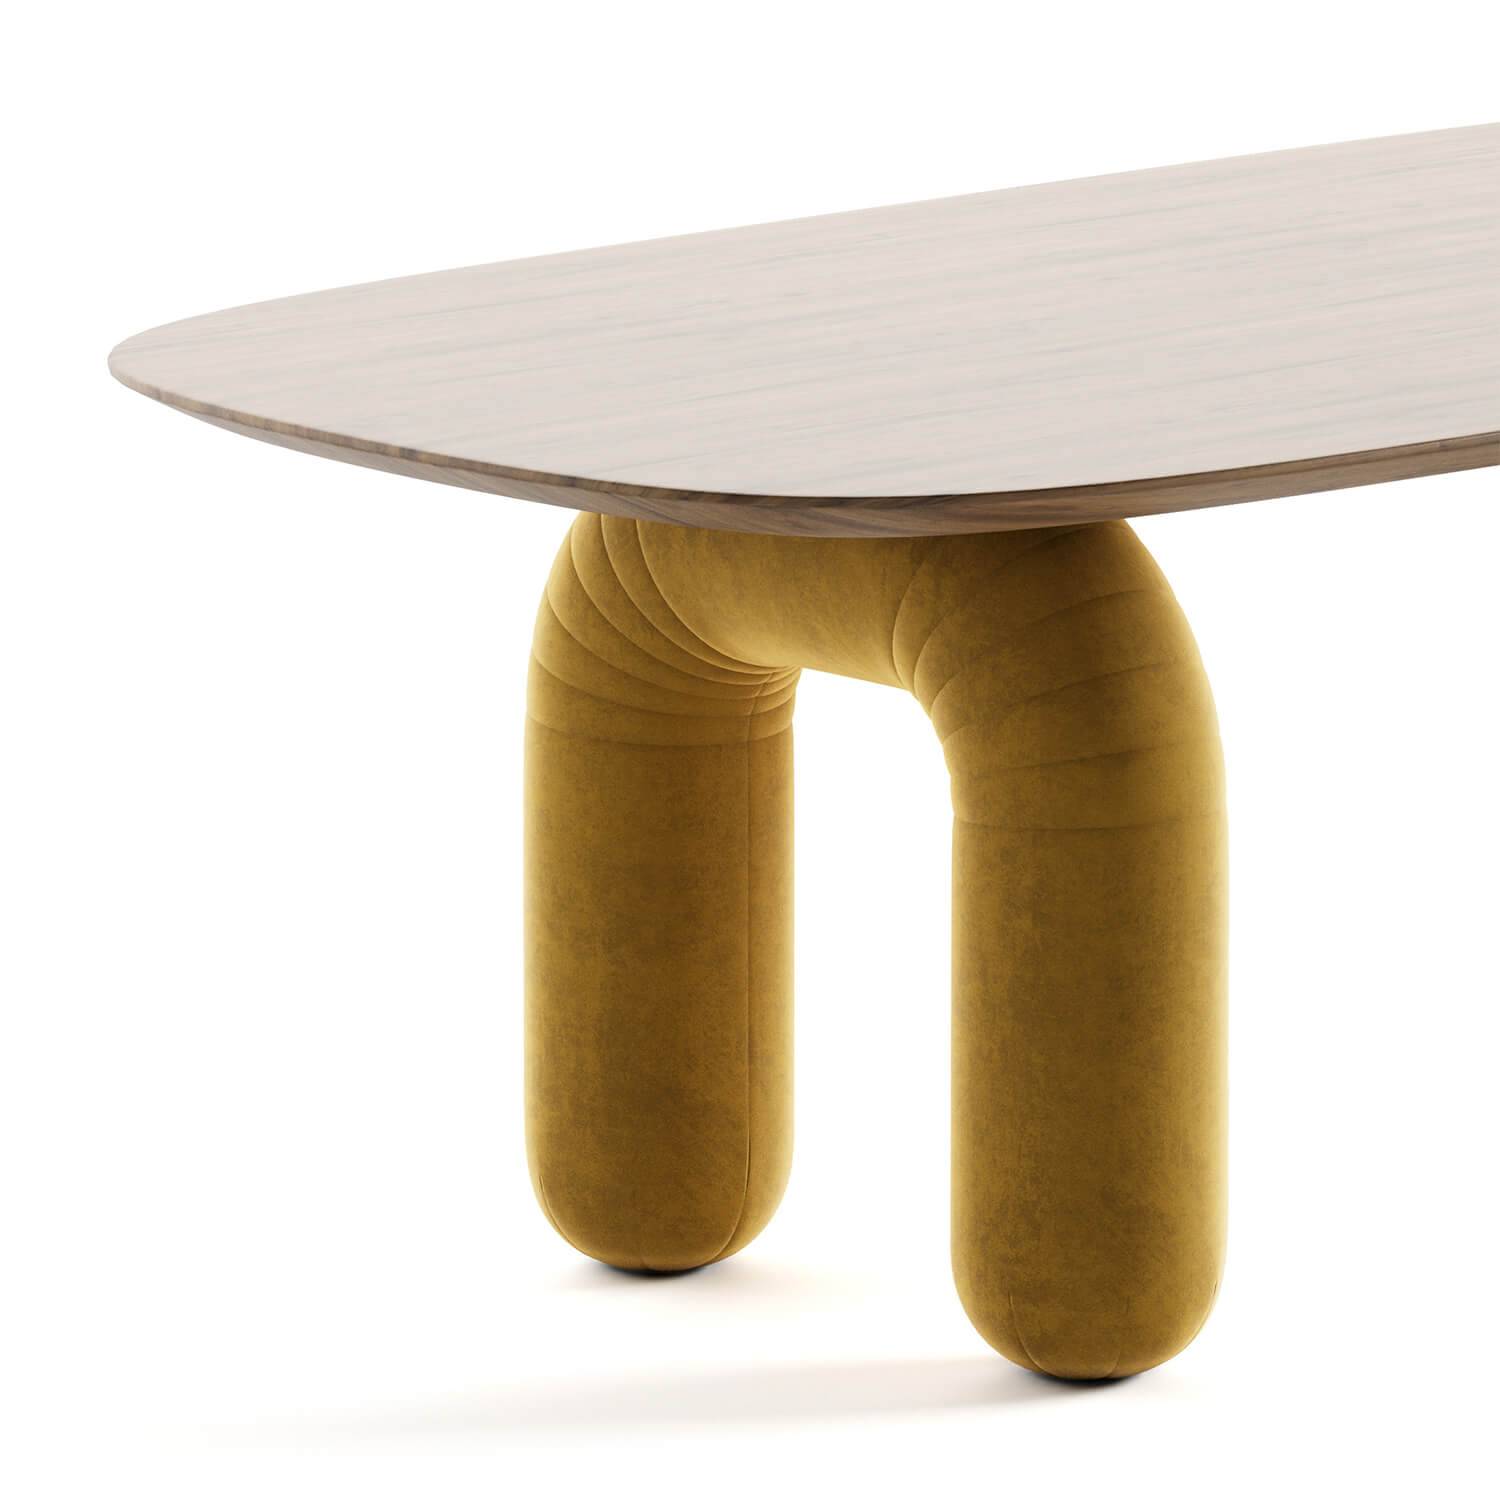 Penelope wooden dining table